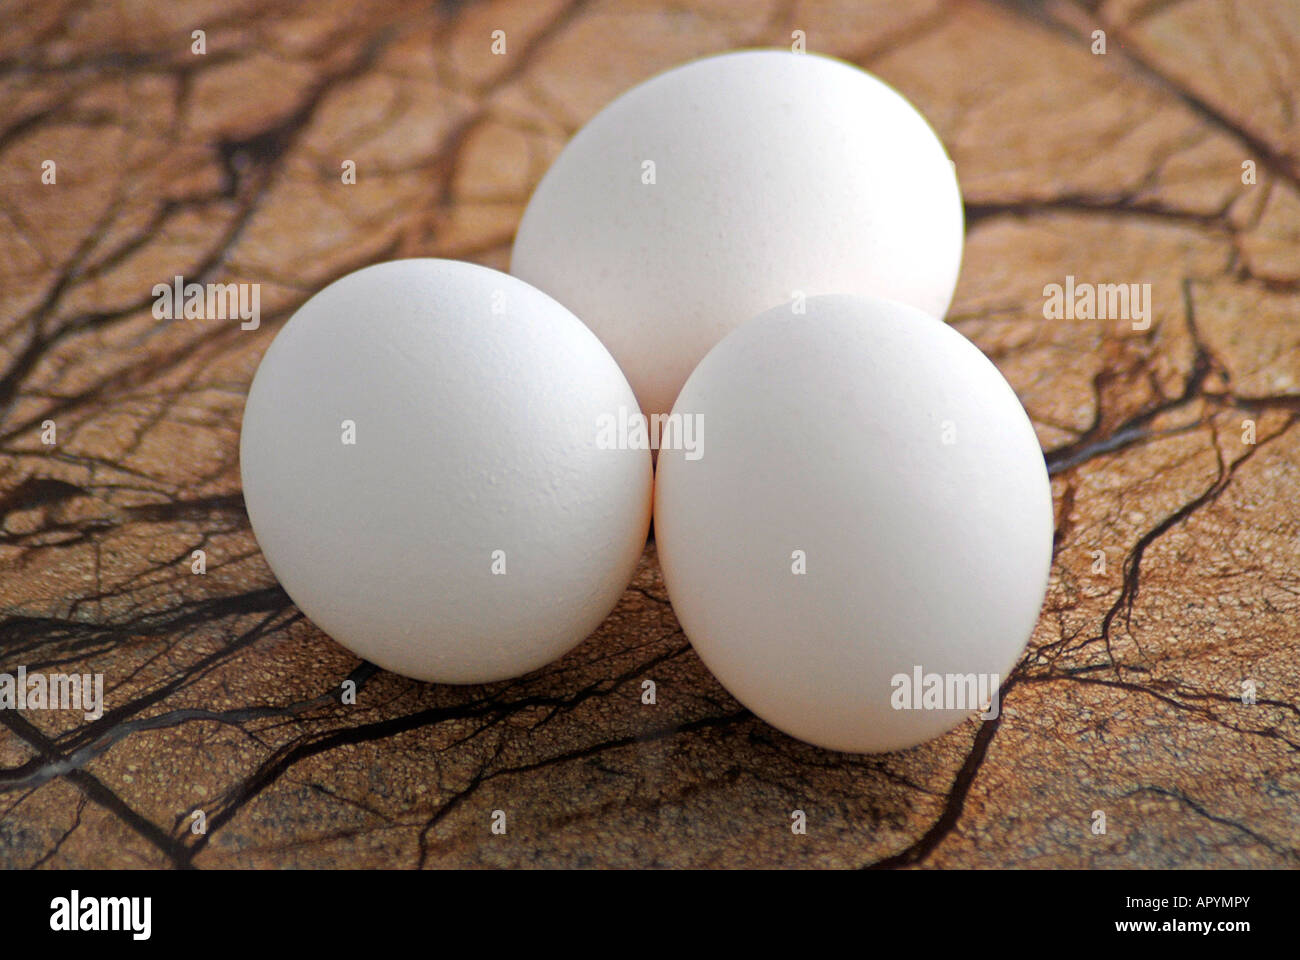 Three White Chicken Eggs on marble surface Stock Photo